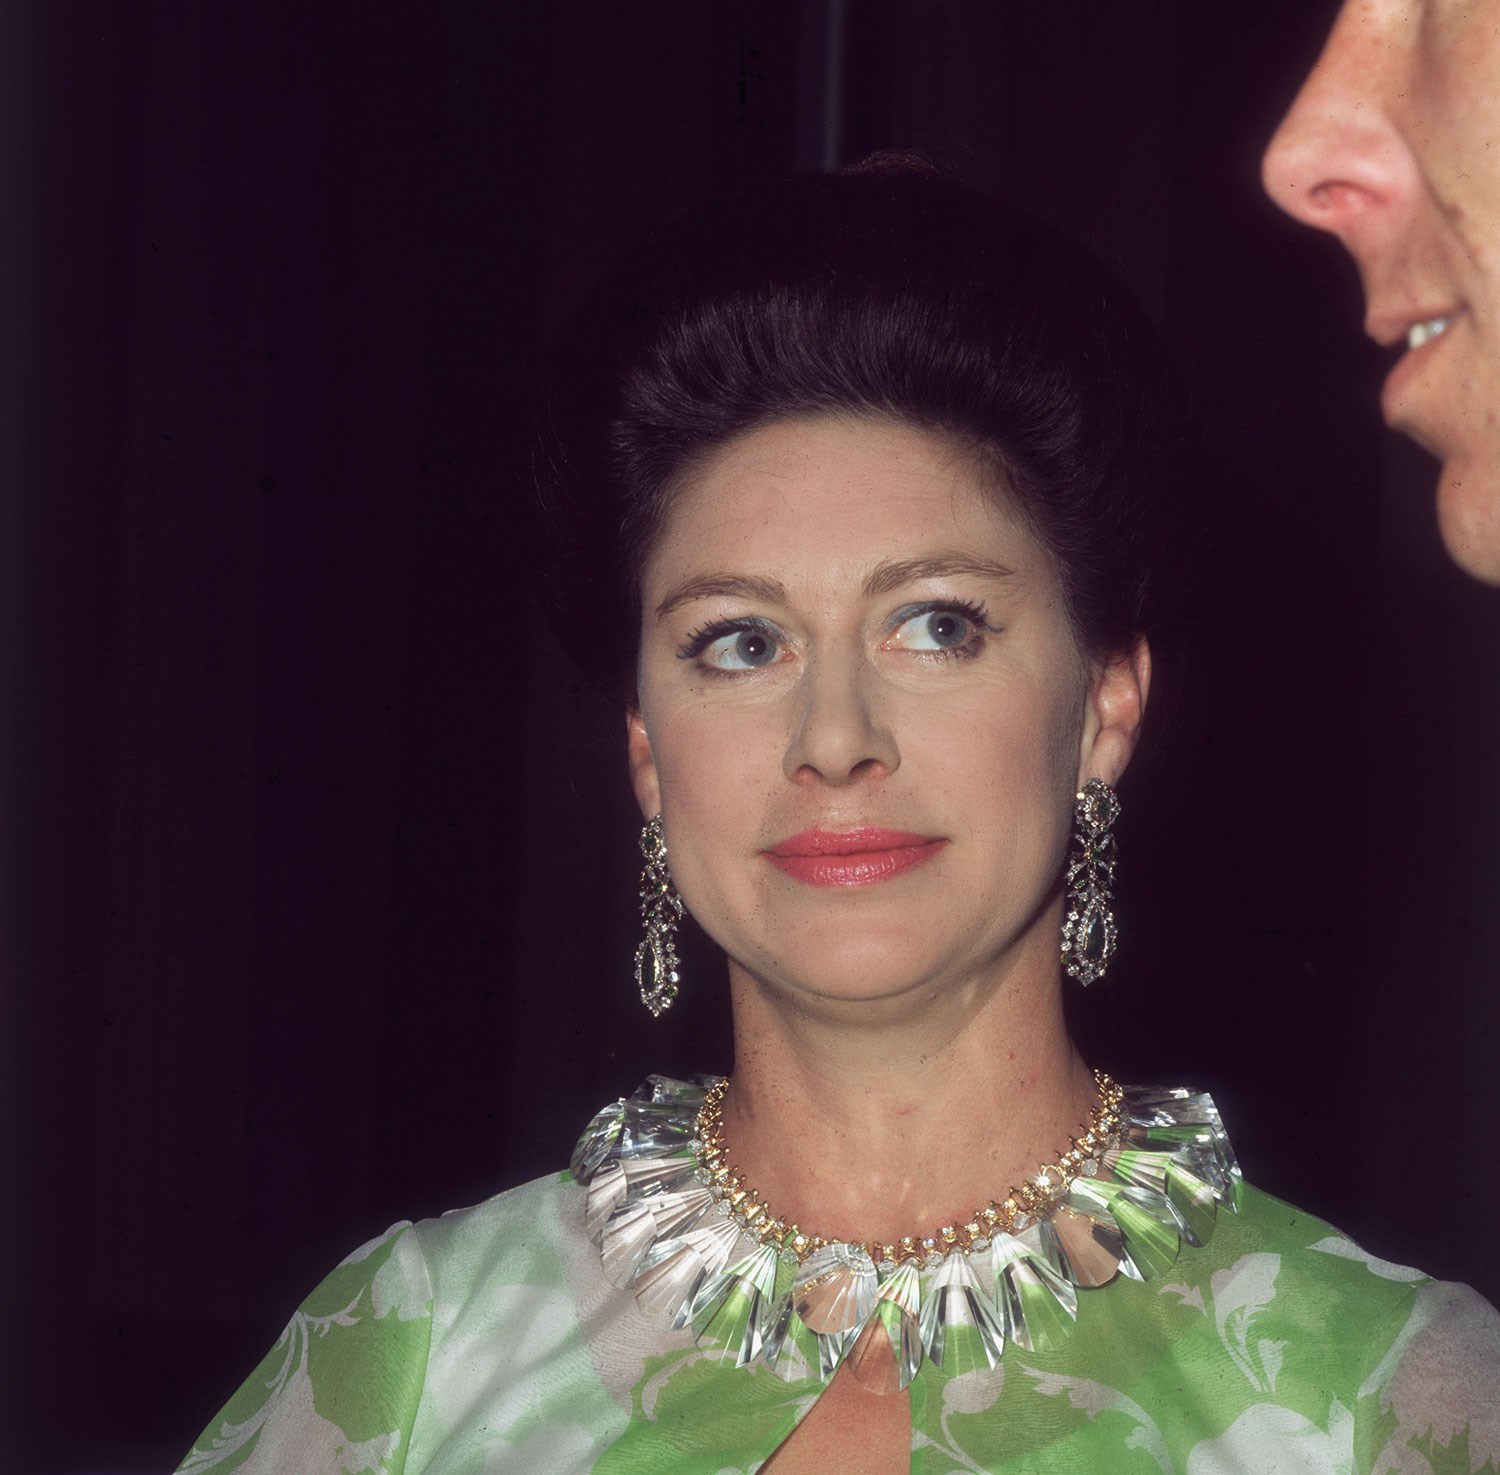 Princess Margaret at the Royal Festival Hall after a Frank Sinatra concert in aid of the NSPCC, May 7, 1970